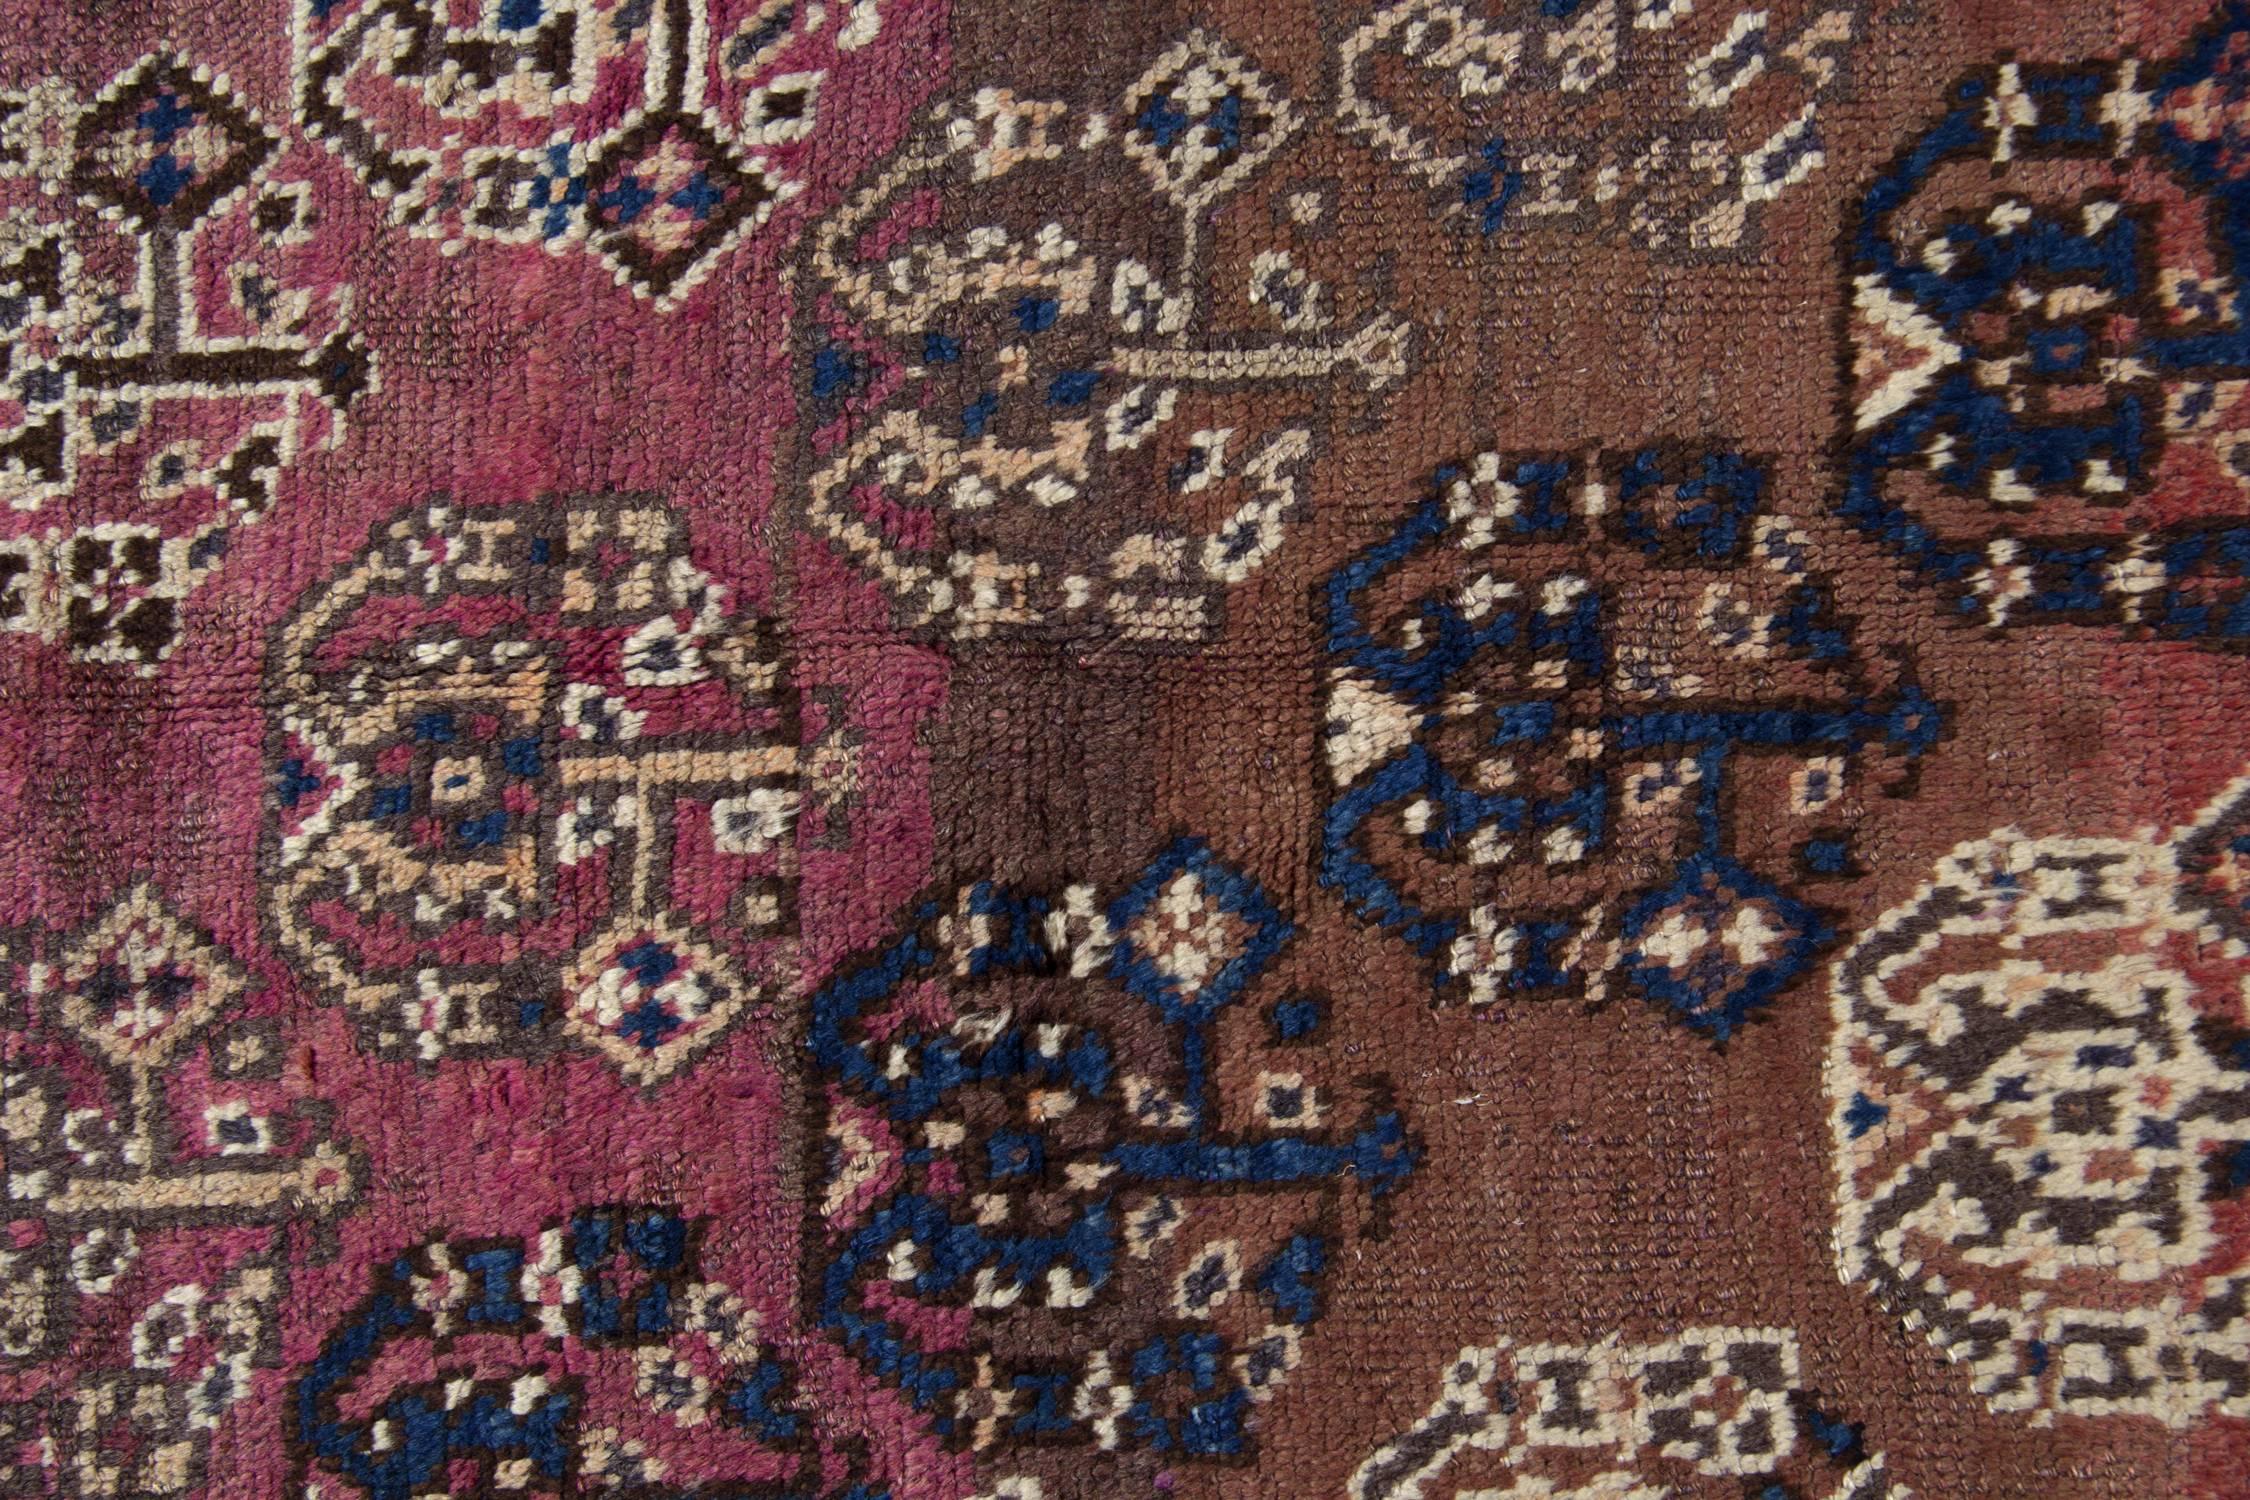 A remarkable Paisley pattern decorates the background of this beautiful rug. Blue, cream and brown make up the fantastic Tree motifs woven on a pink and rust background. The charming central design is enclosed by a highly-detailed border, featuring